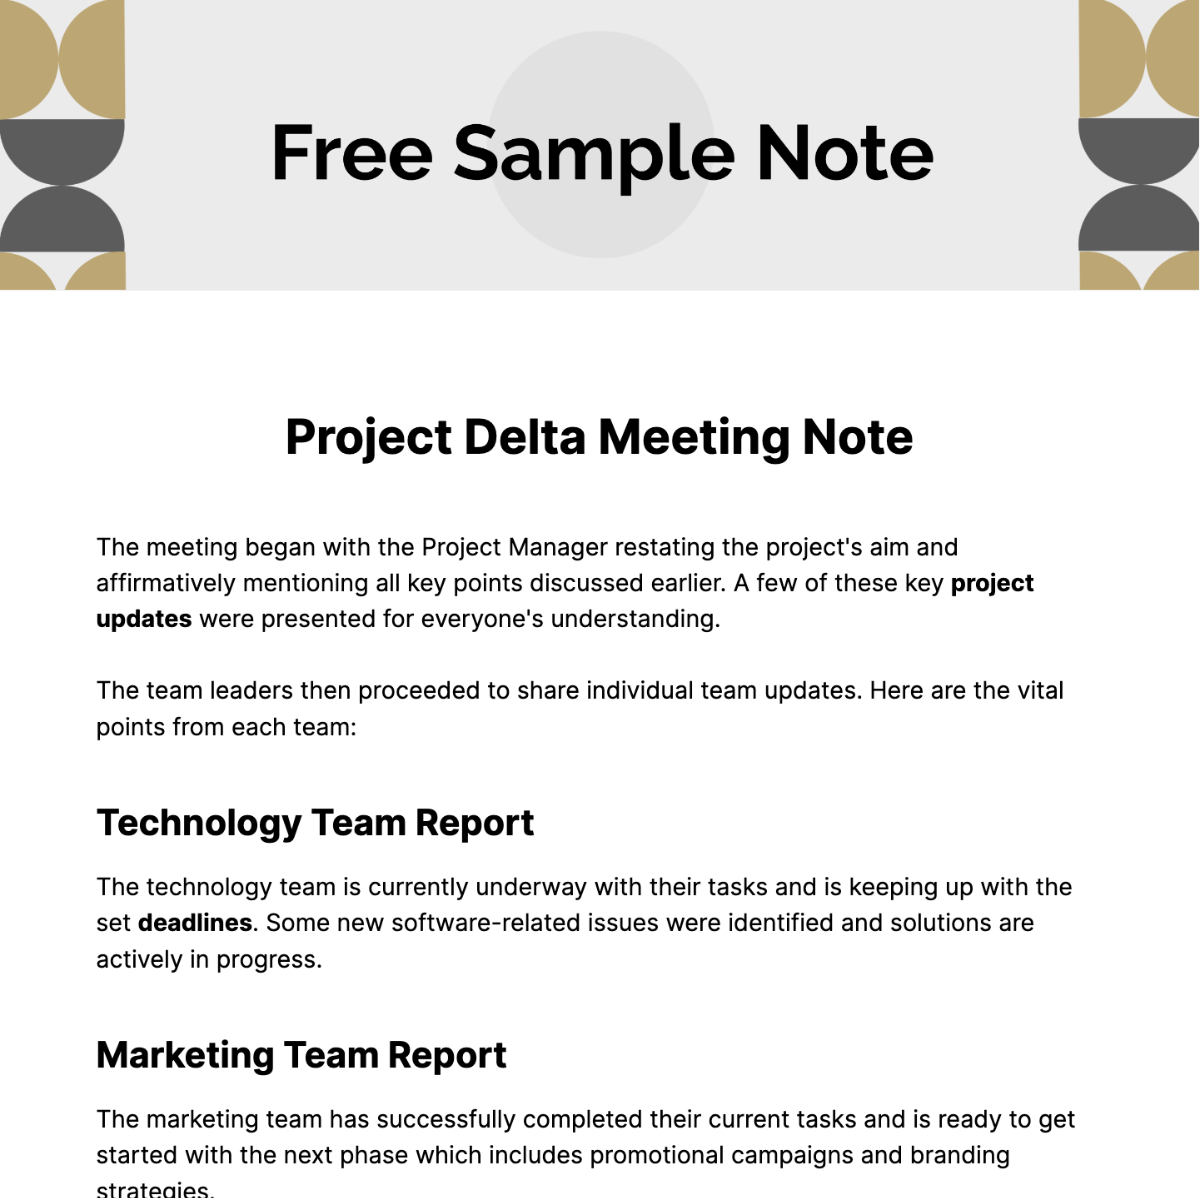 Free Sample Note Template